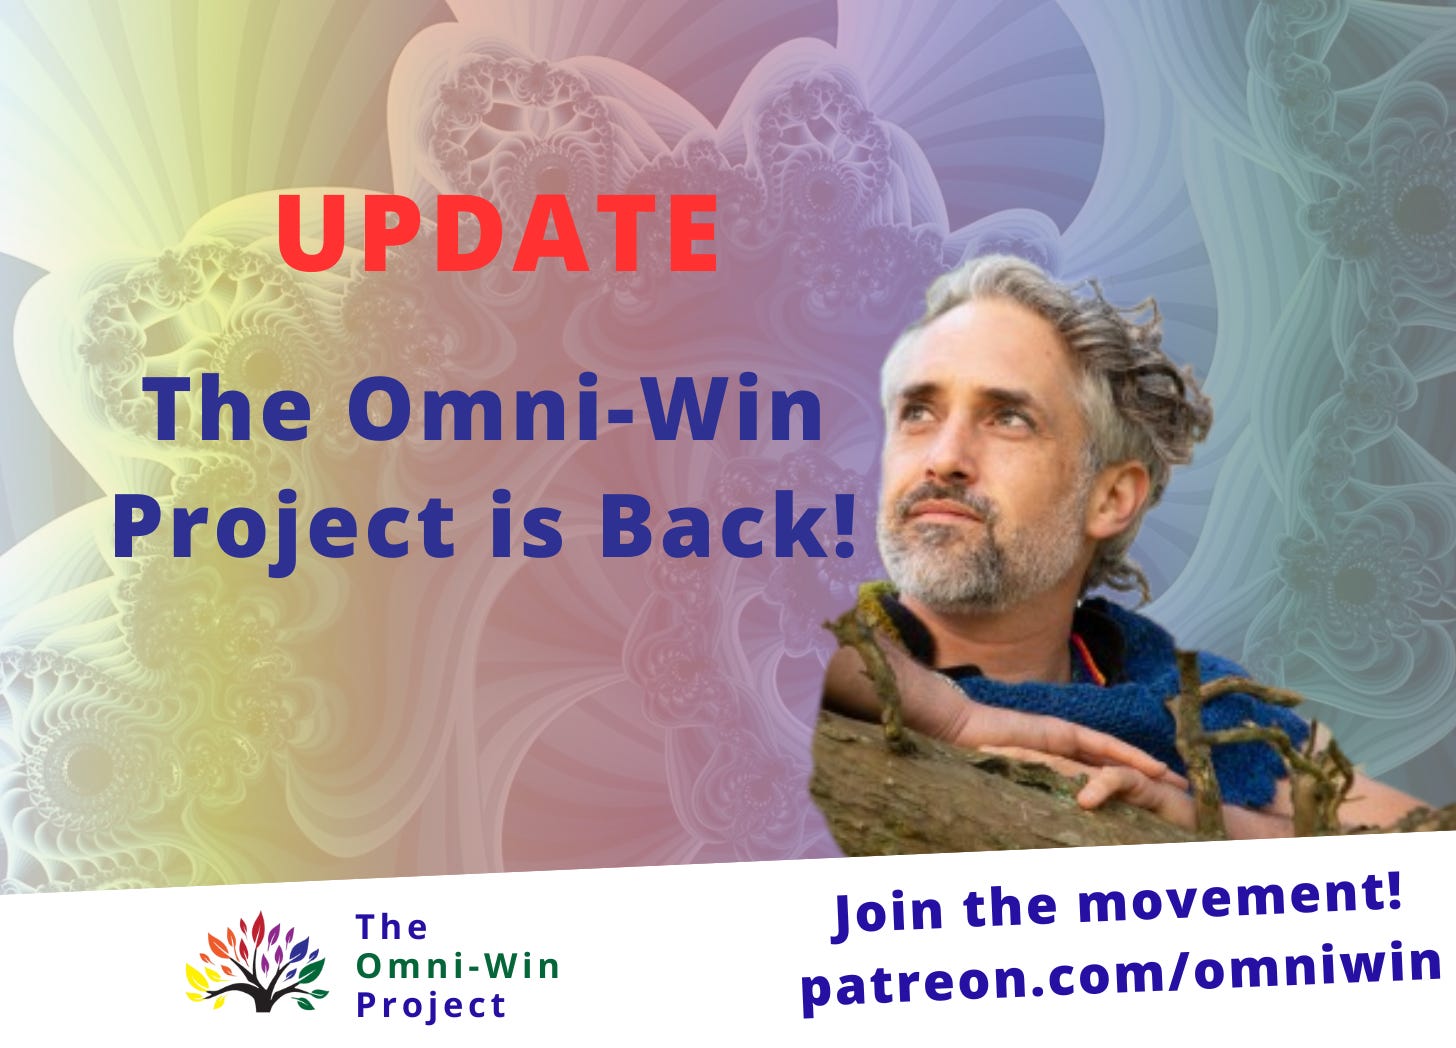 Update, the omni win project is back. join the movement: patreon.com/omniwin